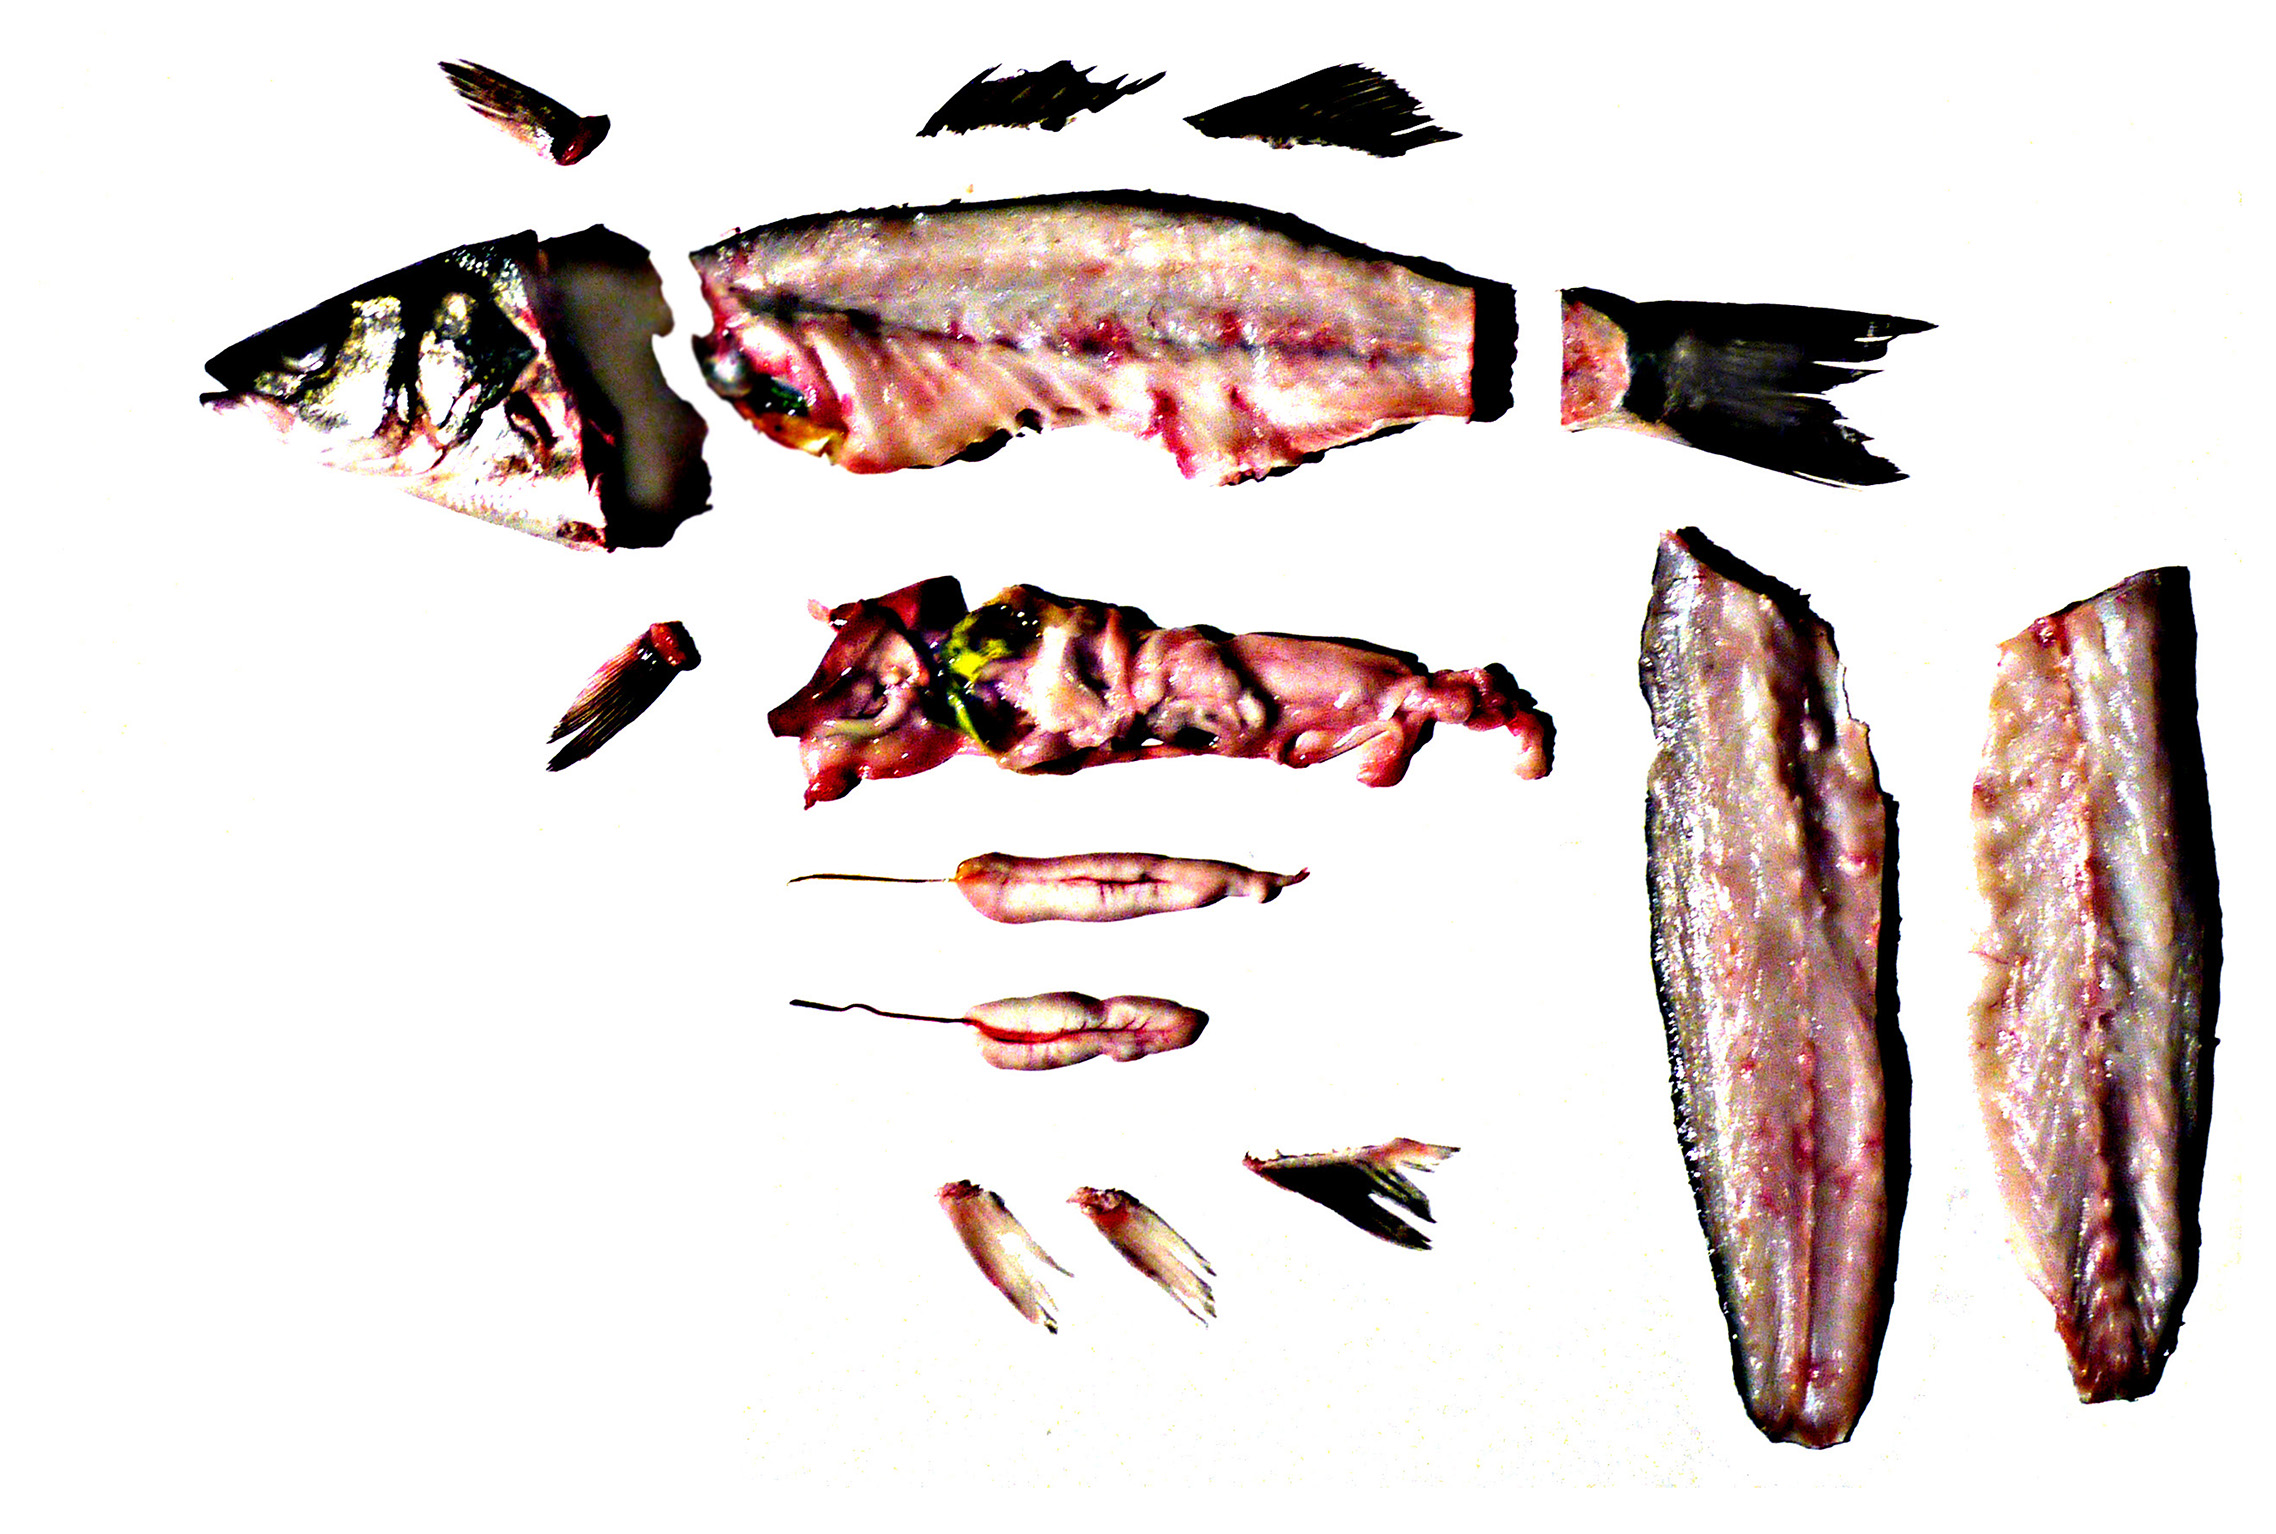 An edited photograph by Theo Galvin showing a filleted fish.